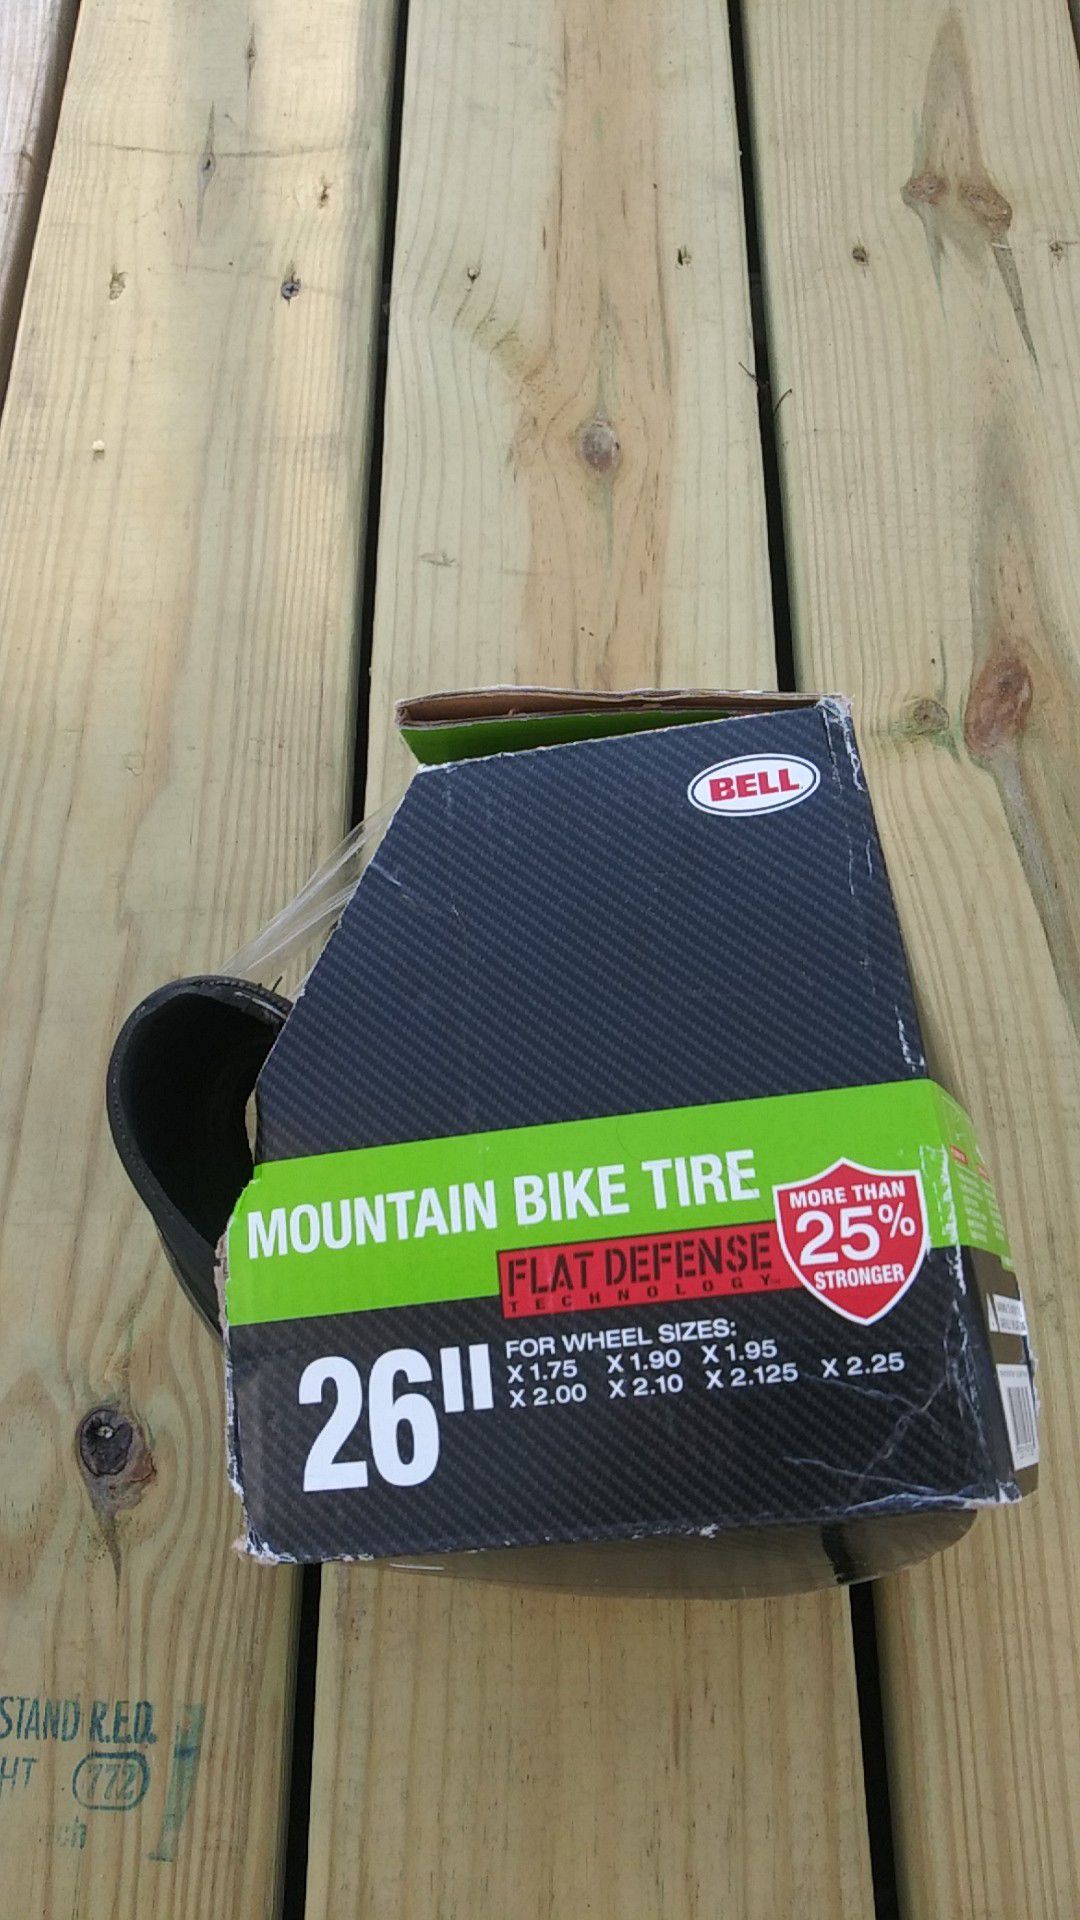 26" mountain bike tire made by bell